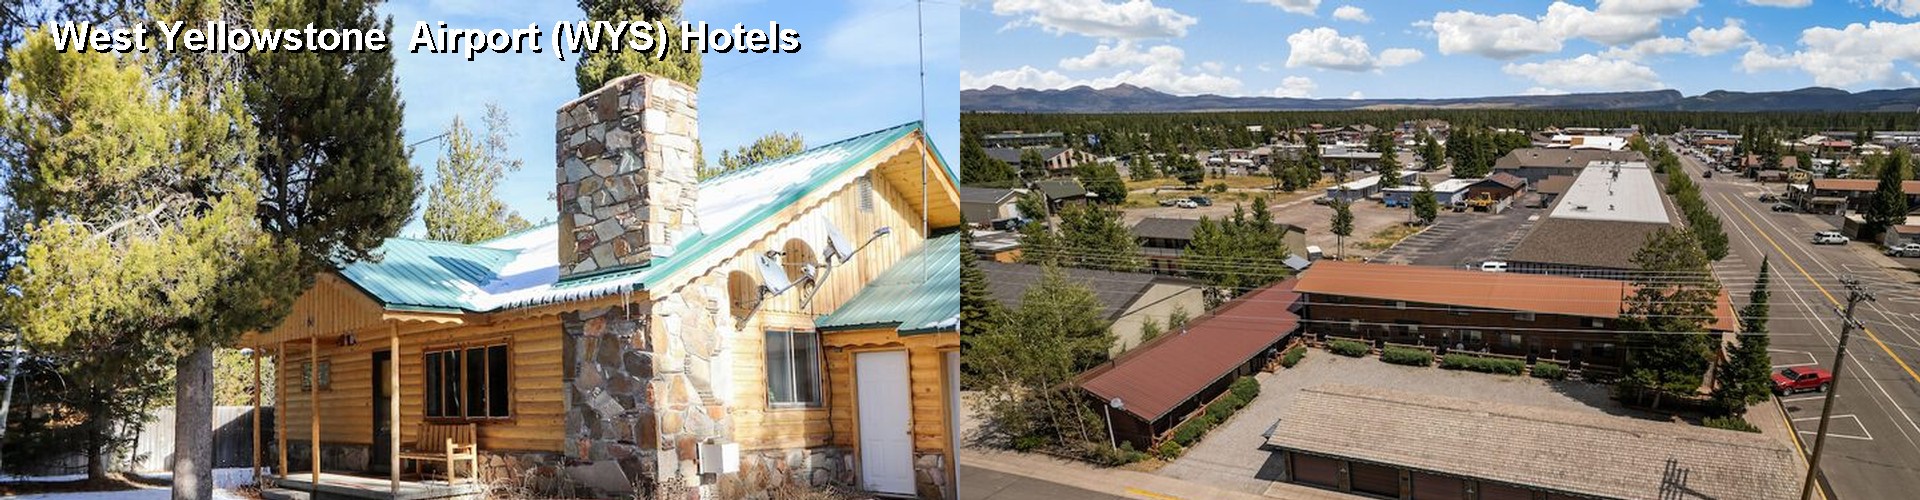 5 Best Hotels near West Yellowstone  Airport (WYS)